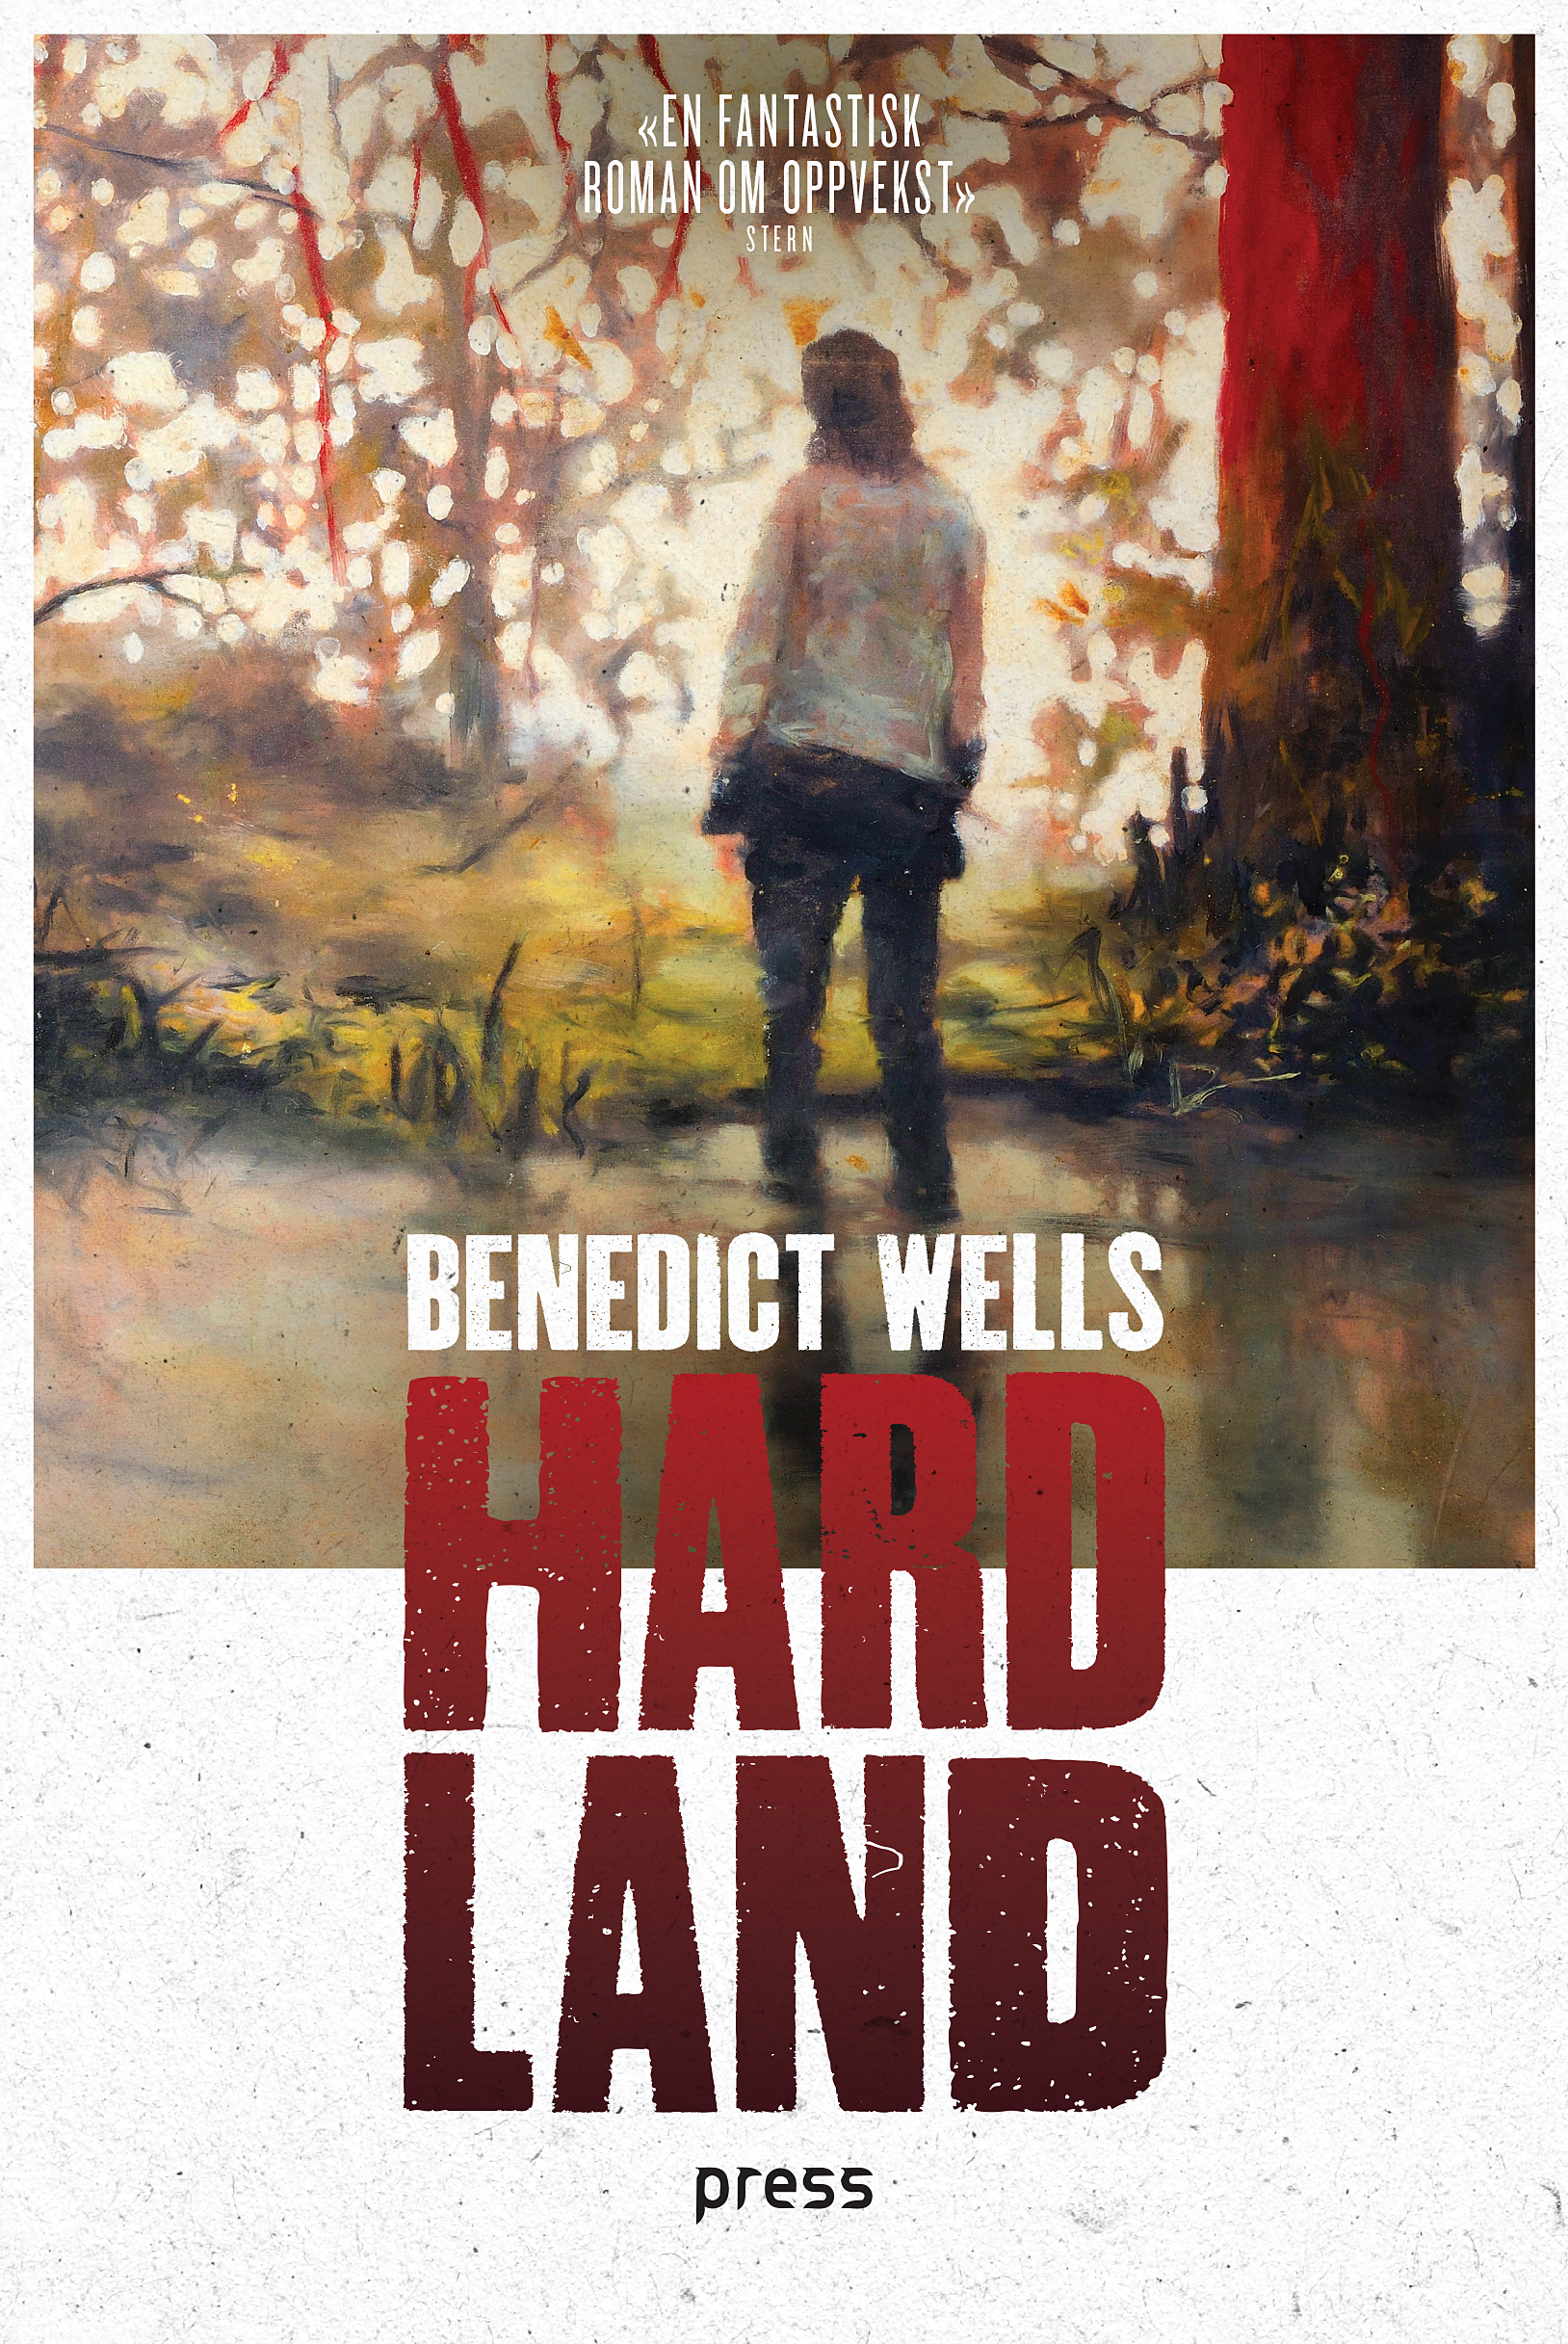 Now published in translation: Hard Land by Benedict Wells in Norwegian